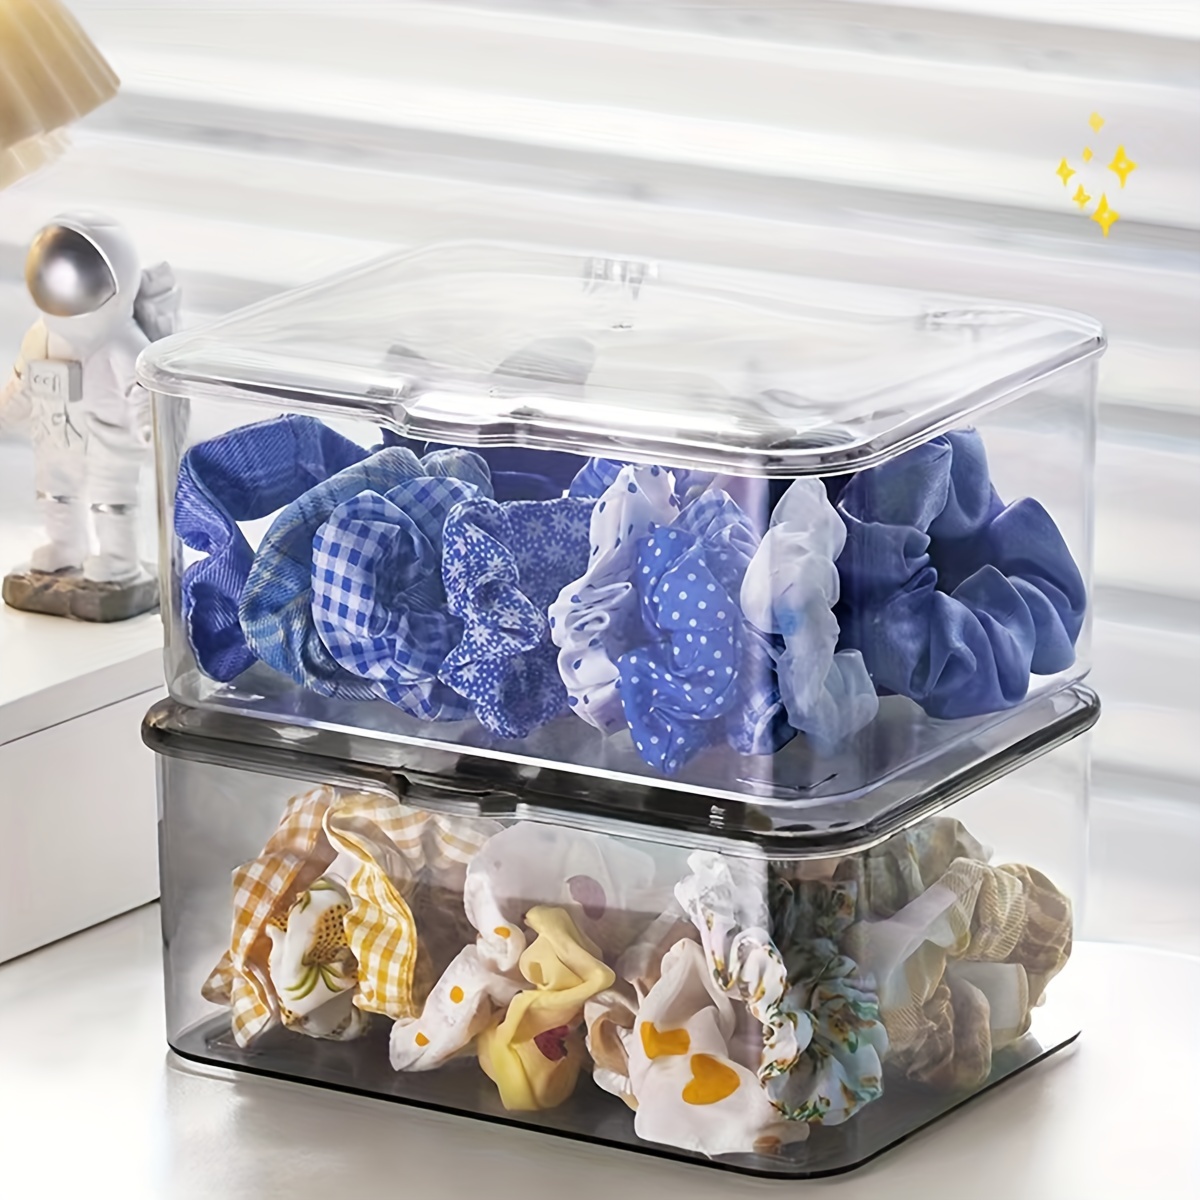 1pc Hair Accessories Storage Box Jewelry Organizer With 5 Compartments For  Hair Ties, Clips, Headbands, And Hairpins